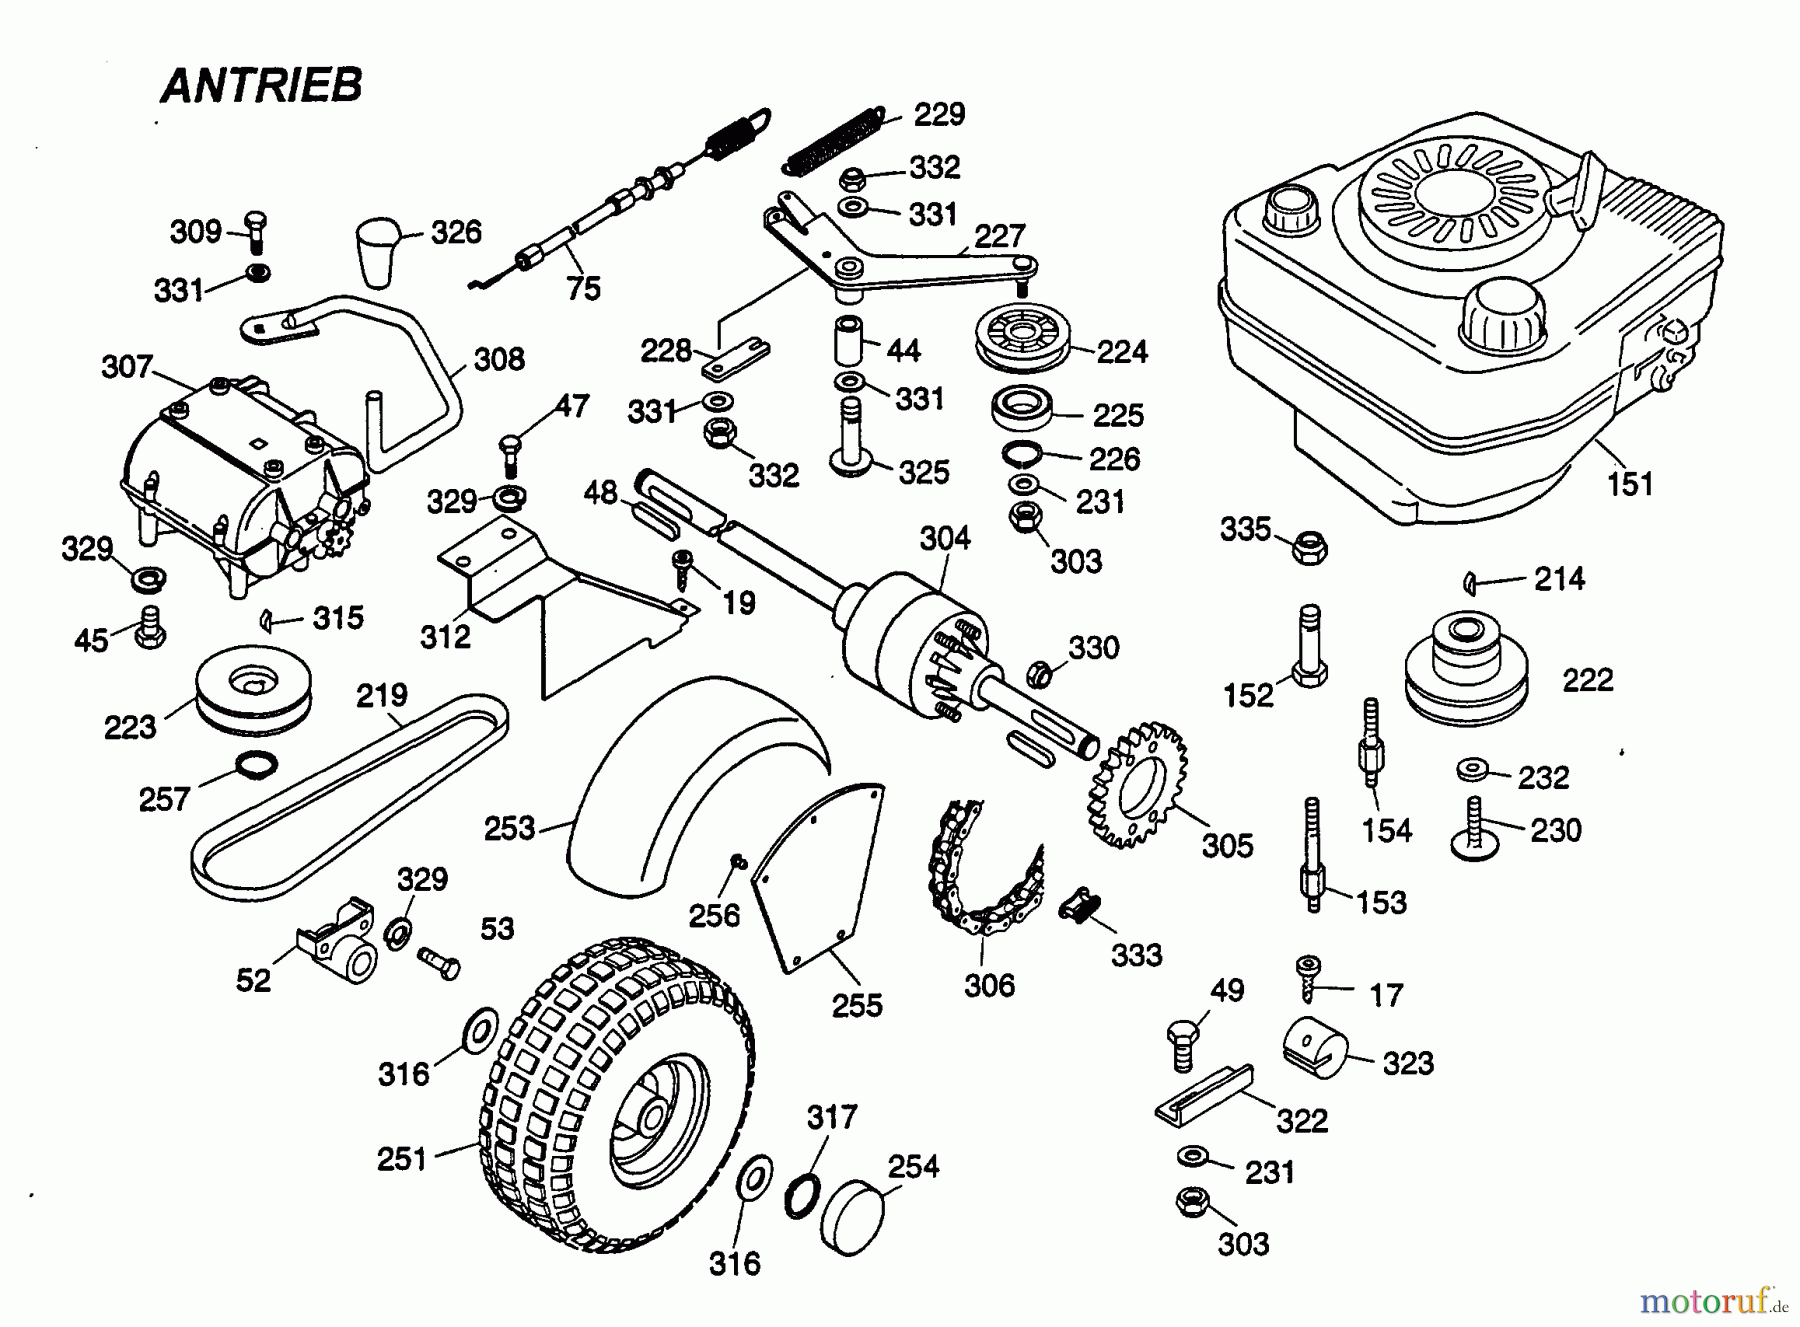  Wolf-Garten Cart OHV 2 6190000 Series A  (1998) Differential, Drive system, Engine